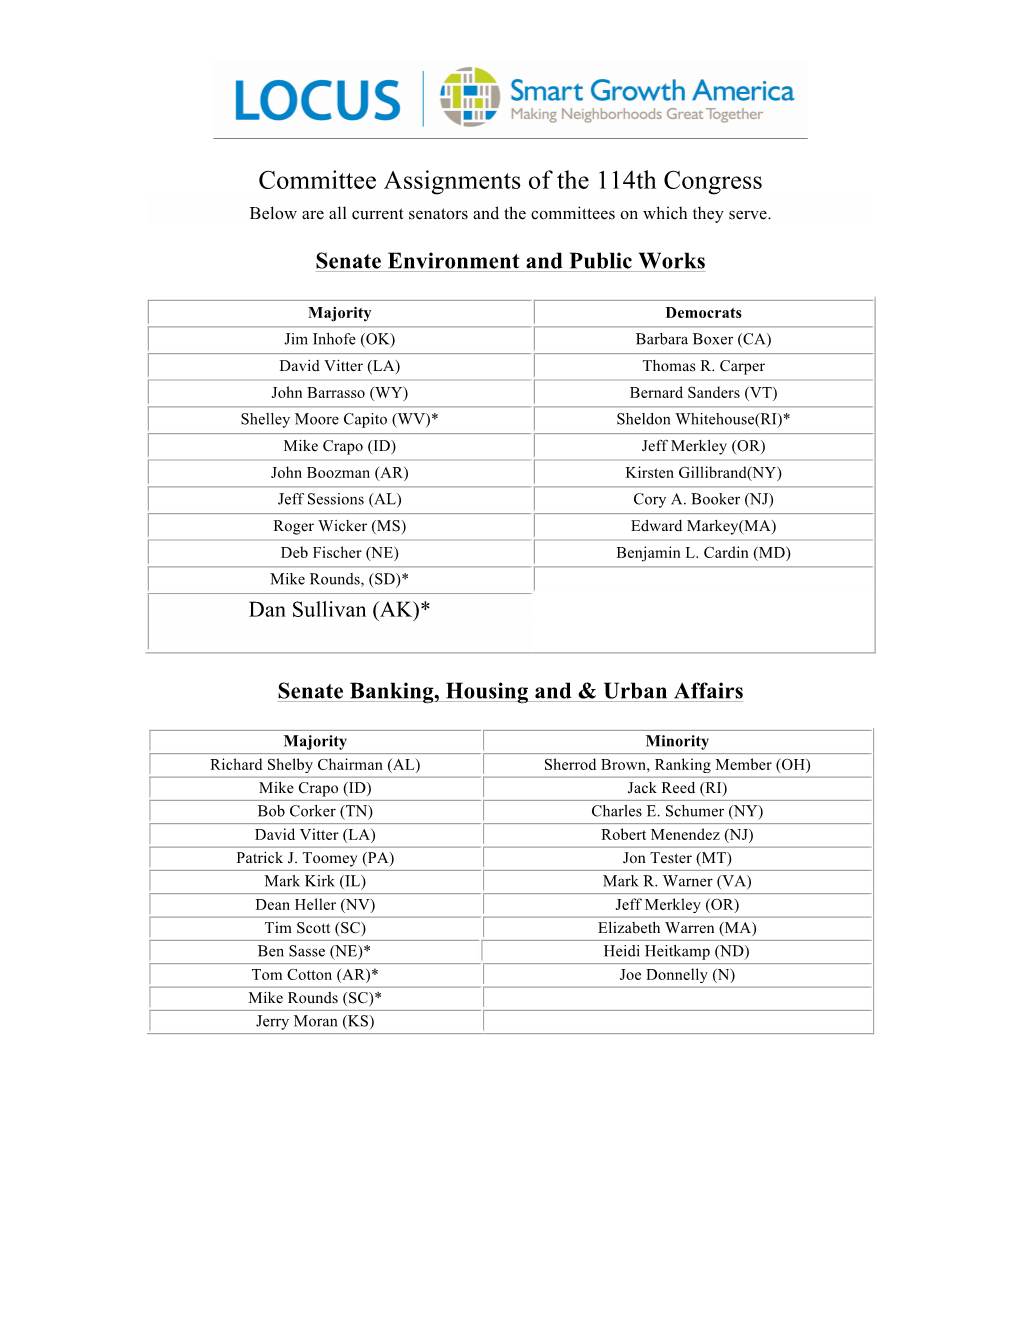 Committee Assignments of the 114Th Congress Below Are All Current Senators and the Committees on Which They Serve